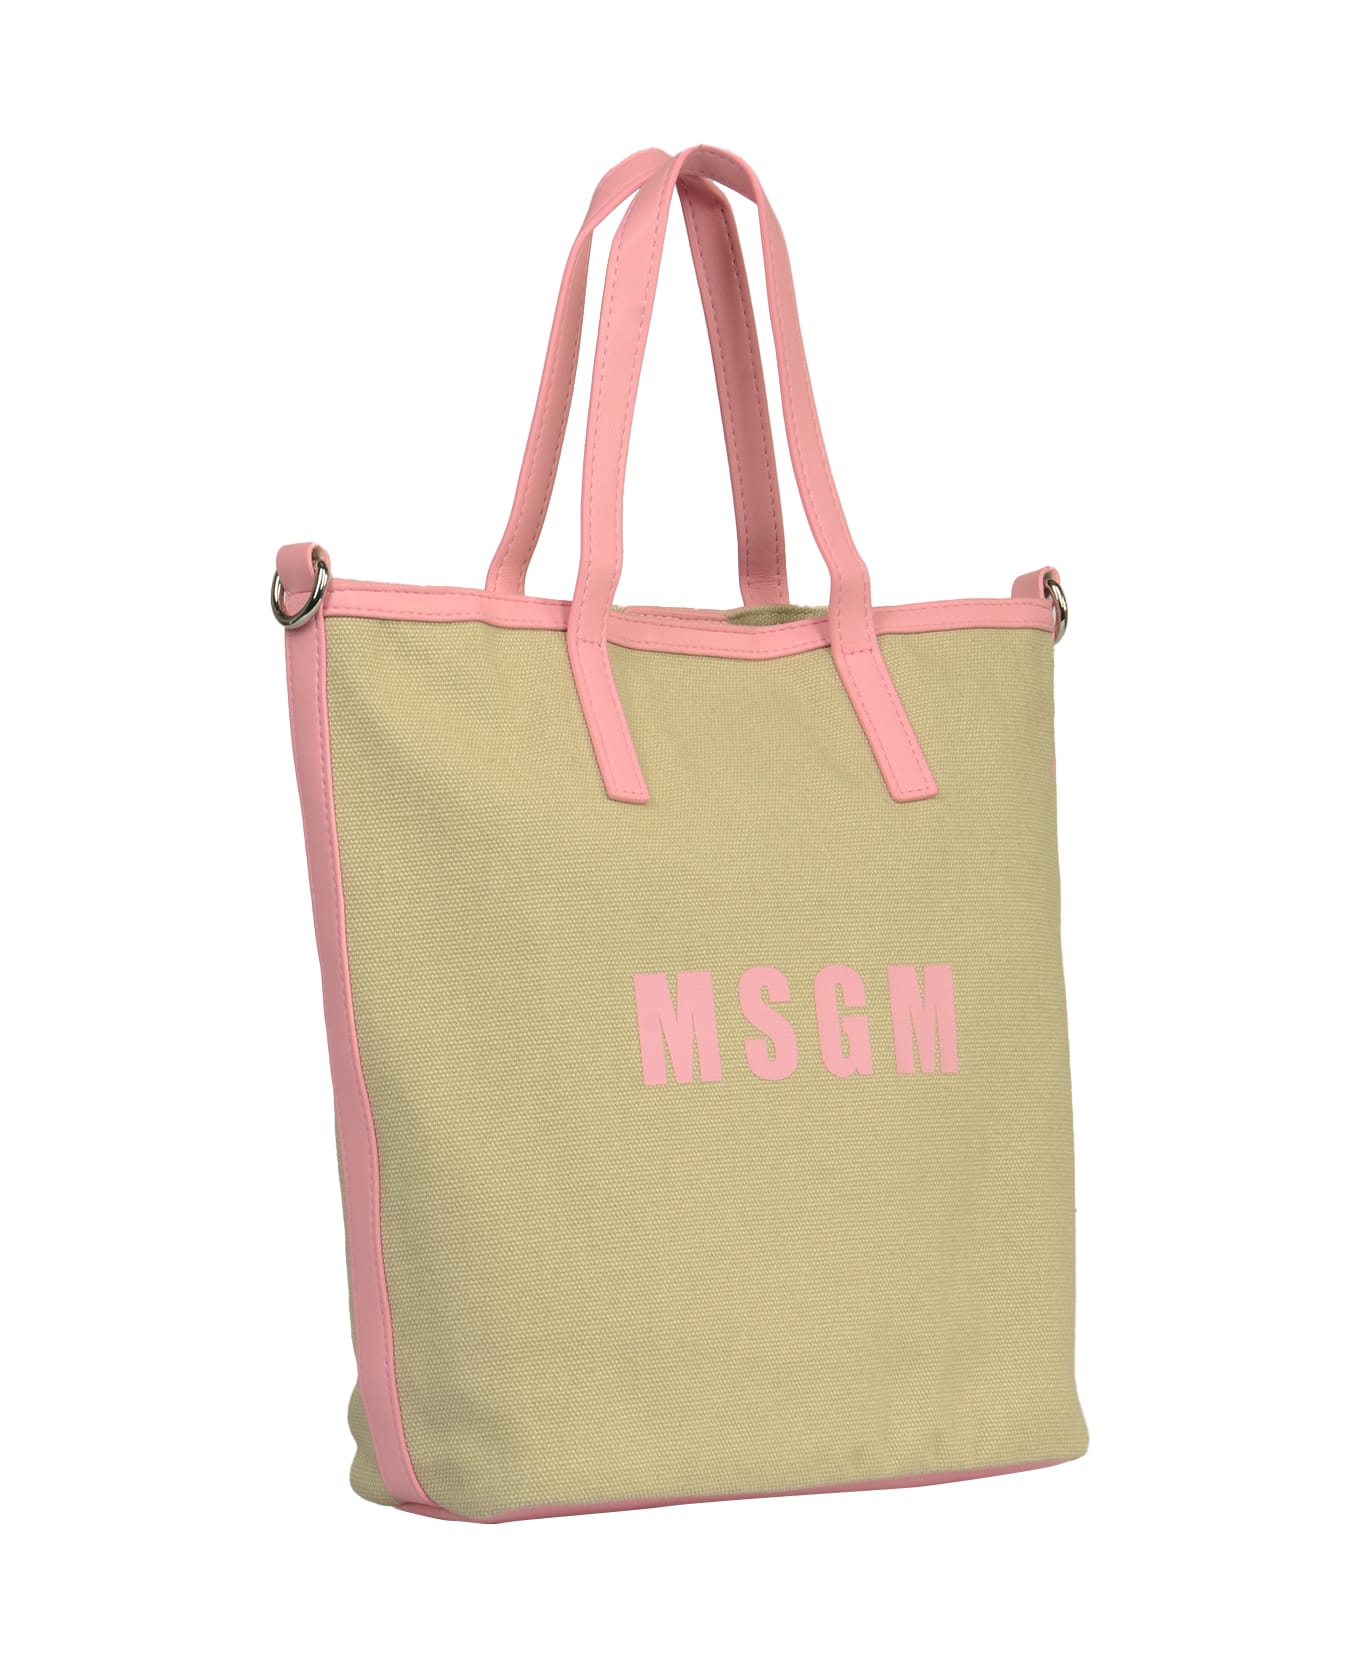 MSGM Logo Small Shopping Tote - Pink/Yellow